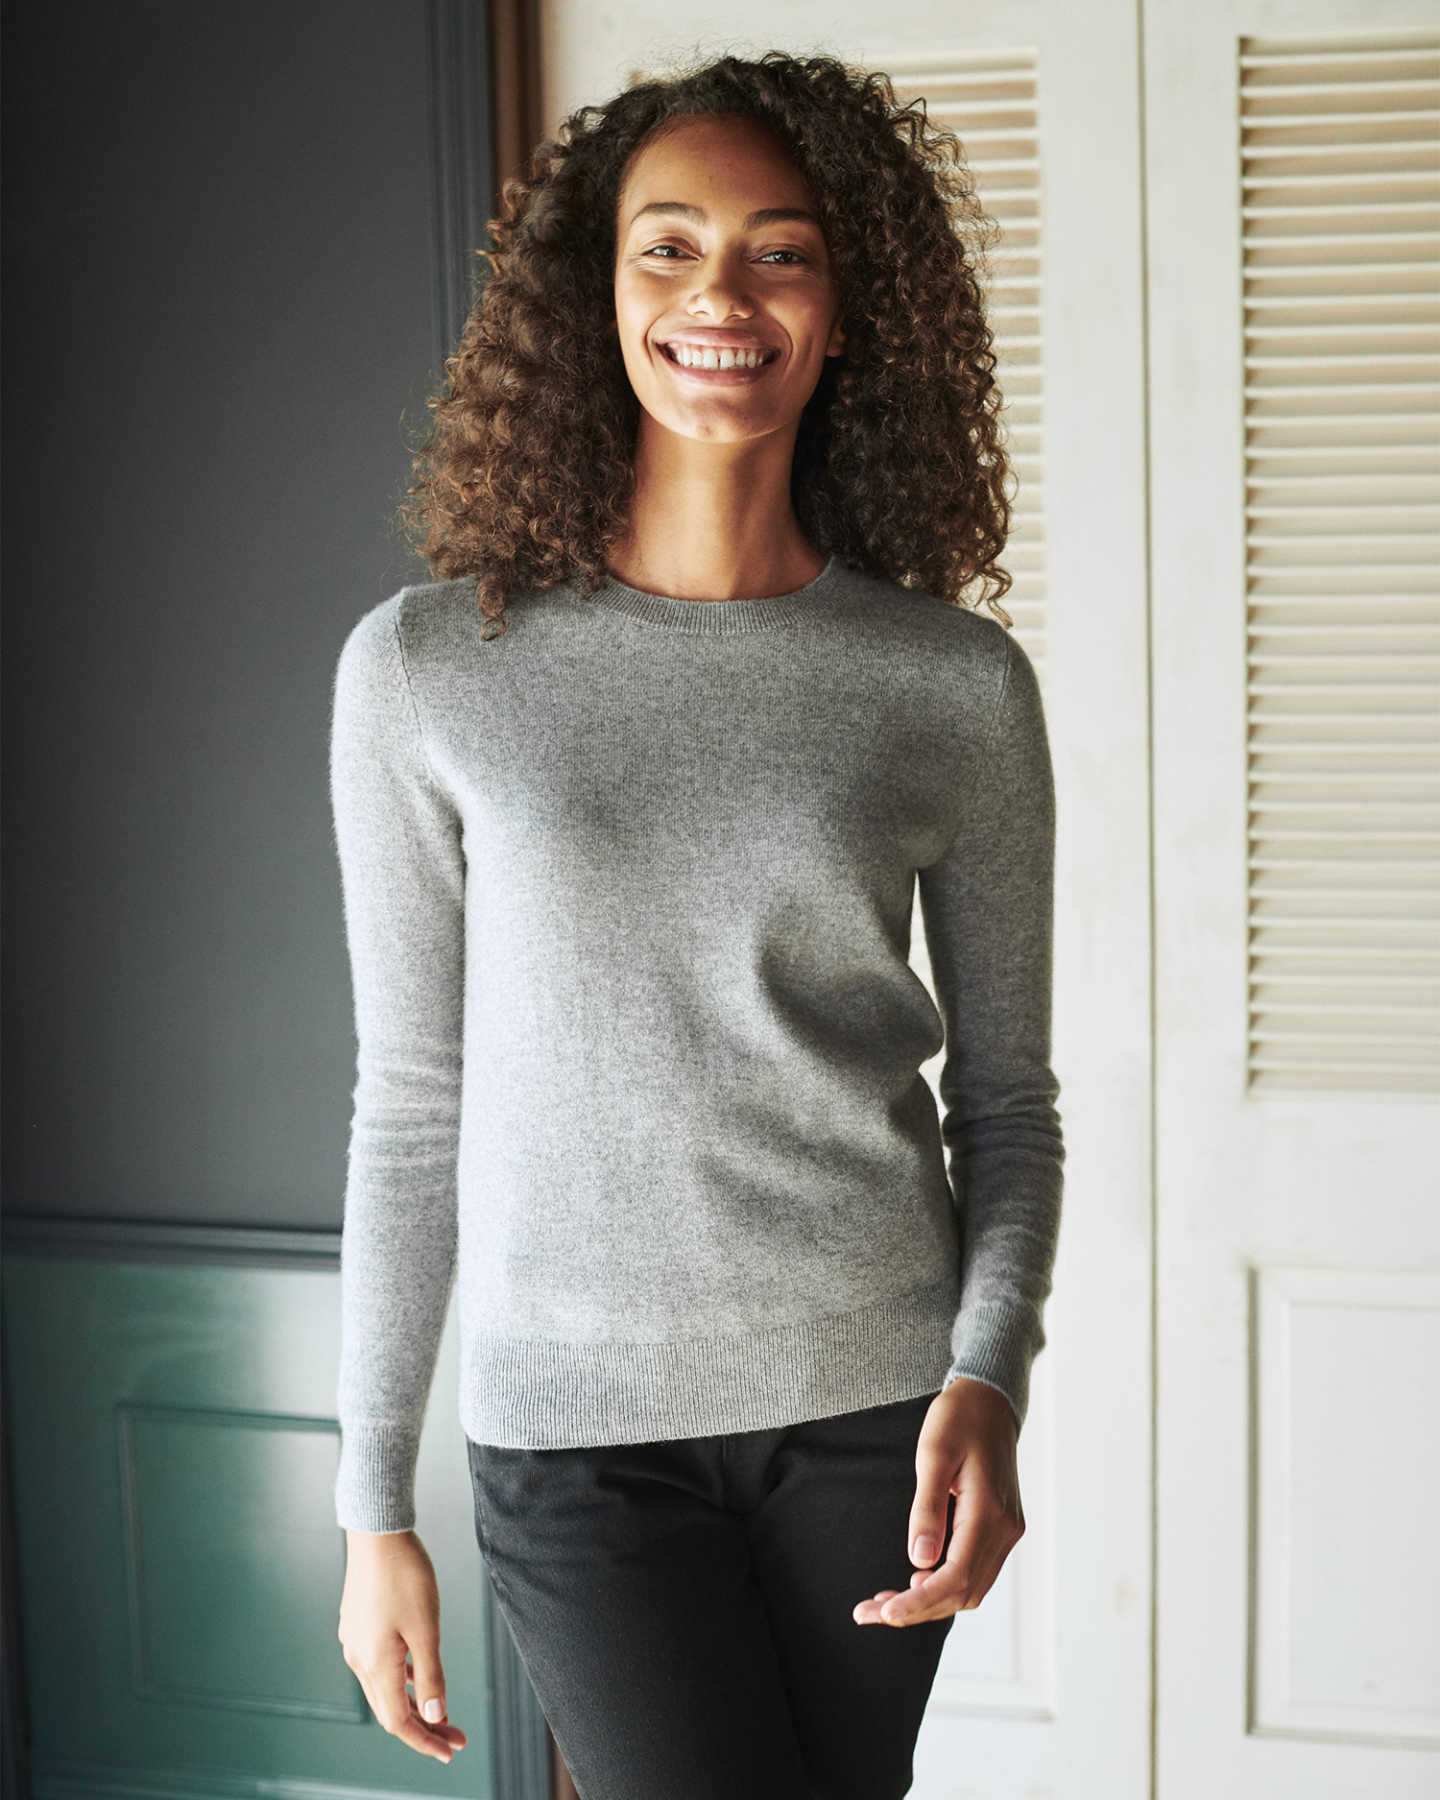 woman wearing grey womens cashmere sweater smiling